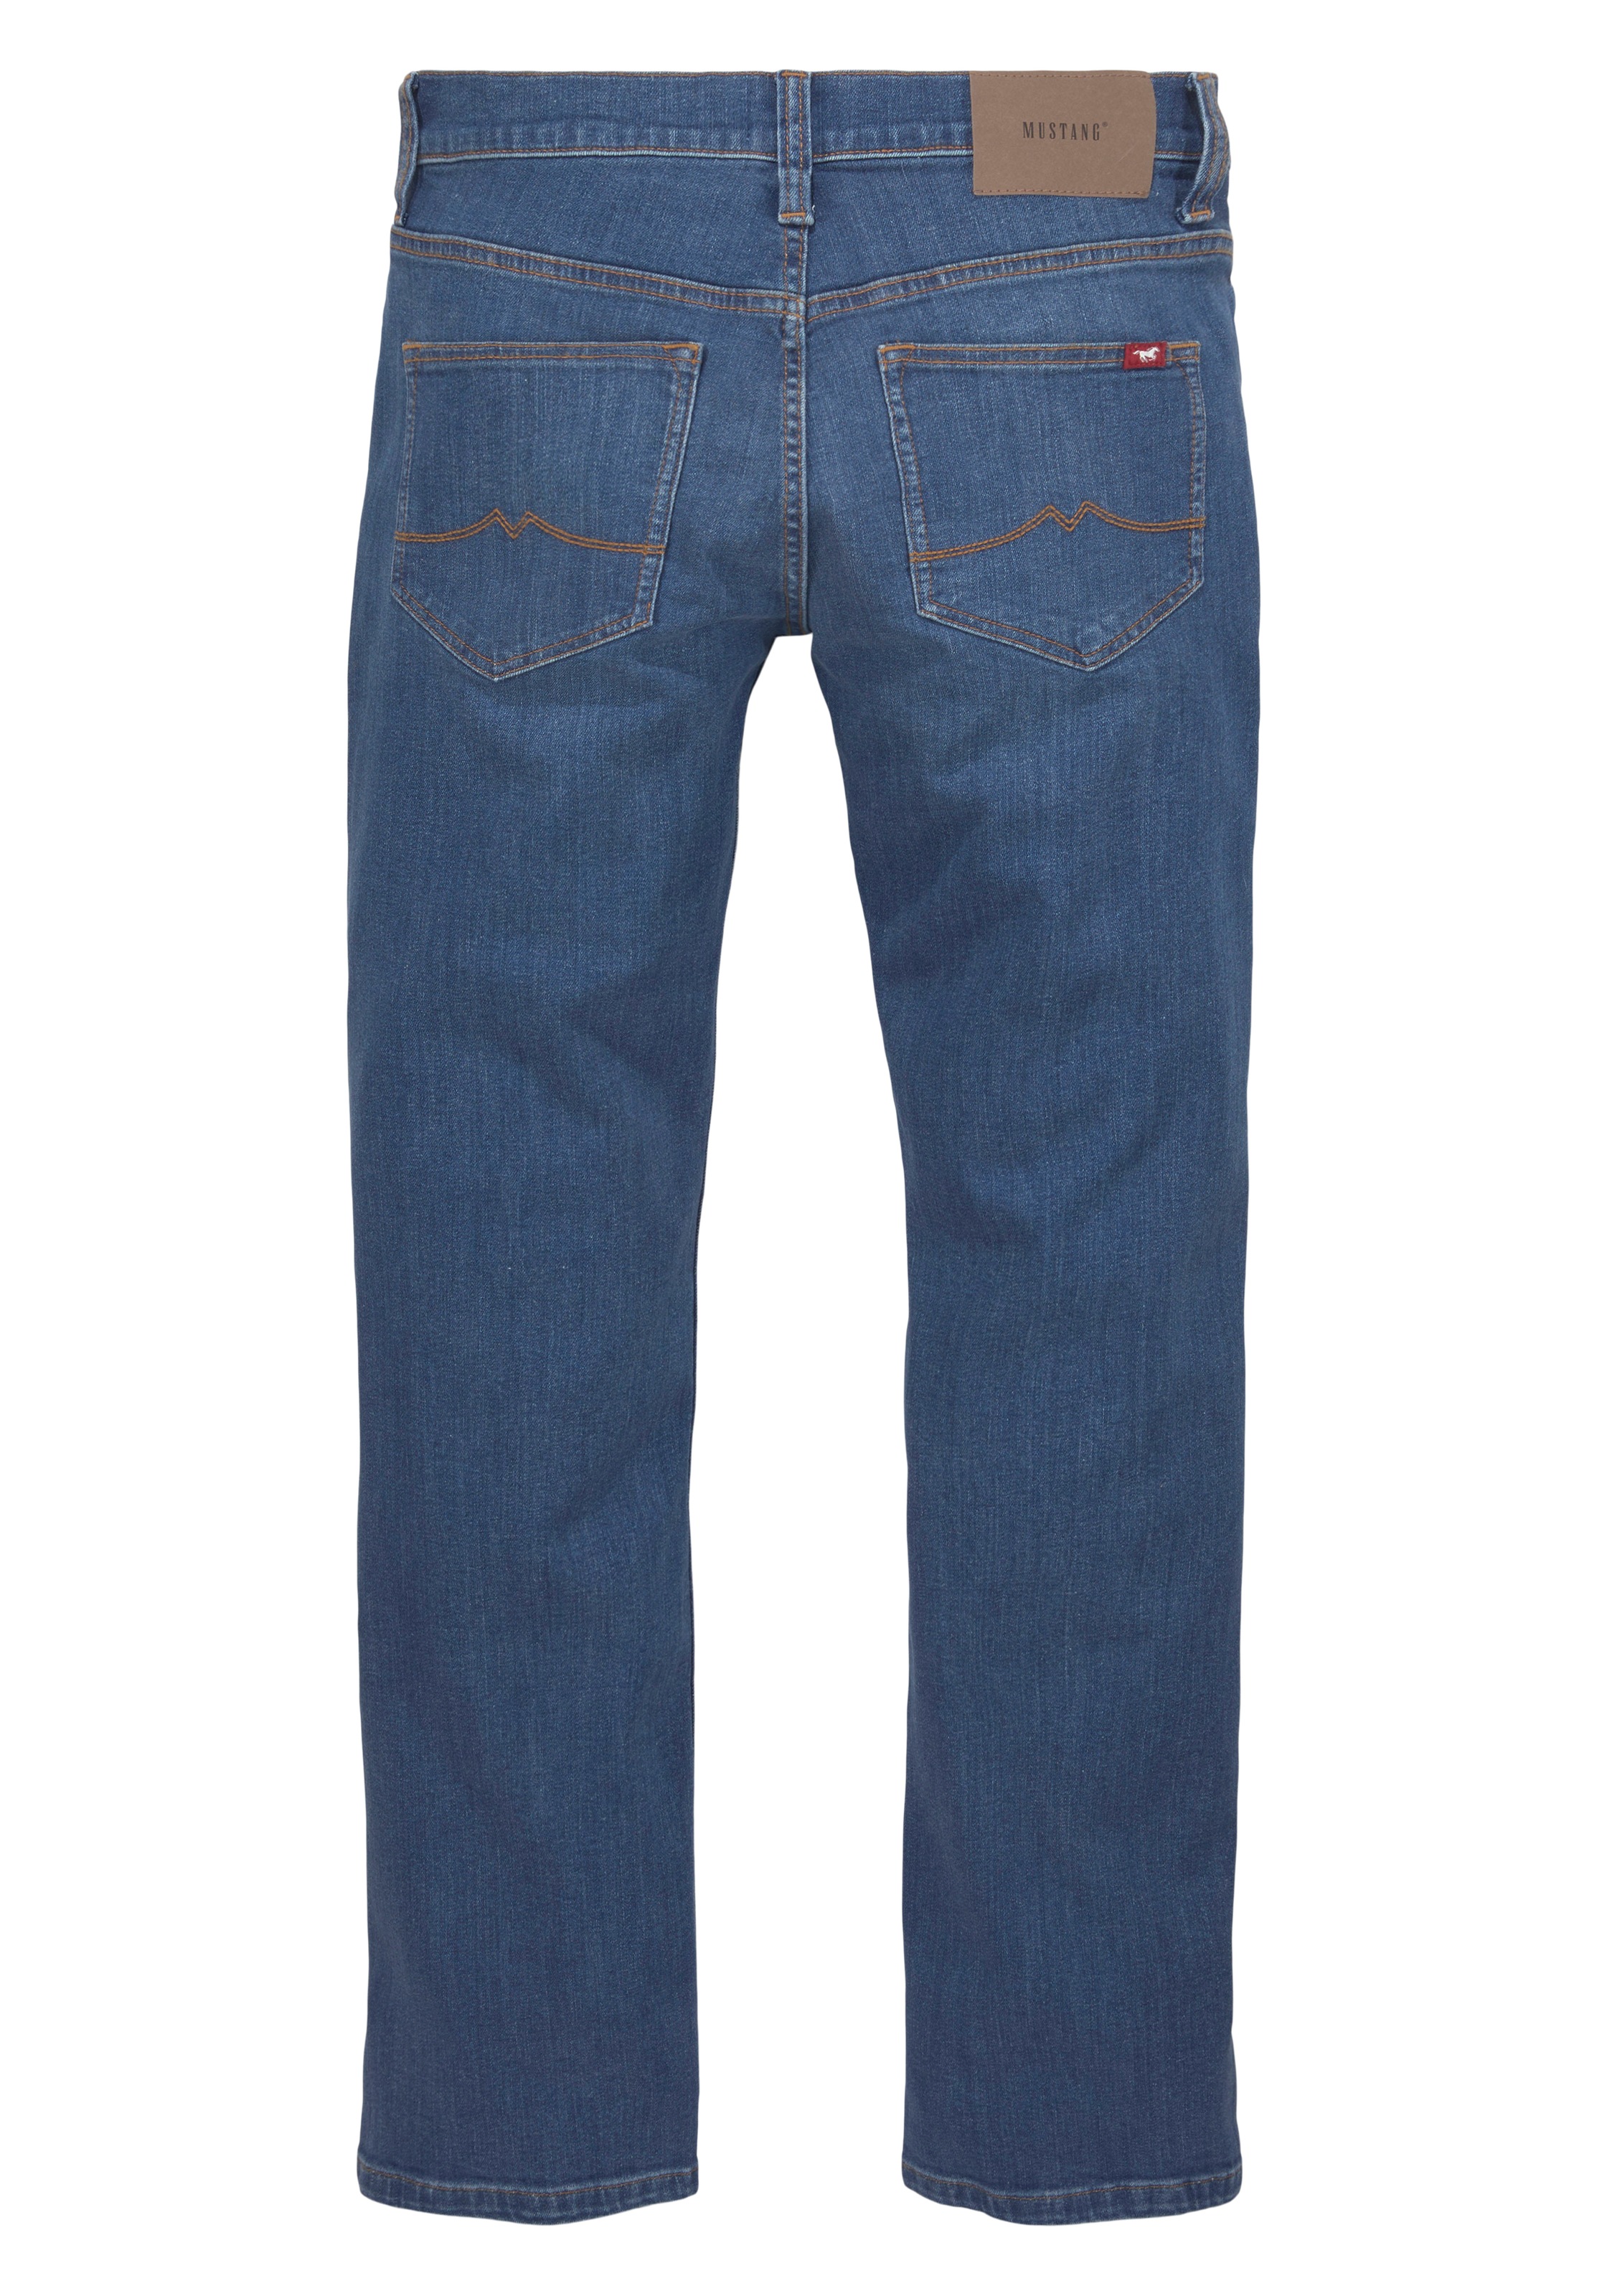 Bootcut-Jeans bei OREGON ♕ »STYLE BOOTCUT« MUSTANG